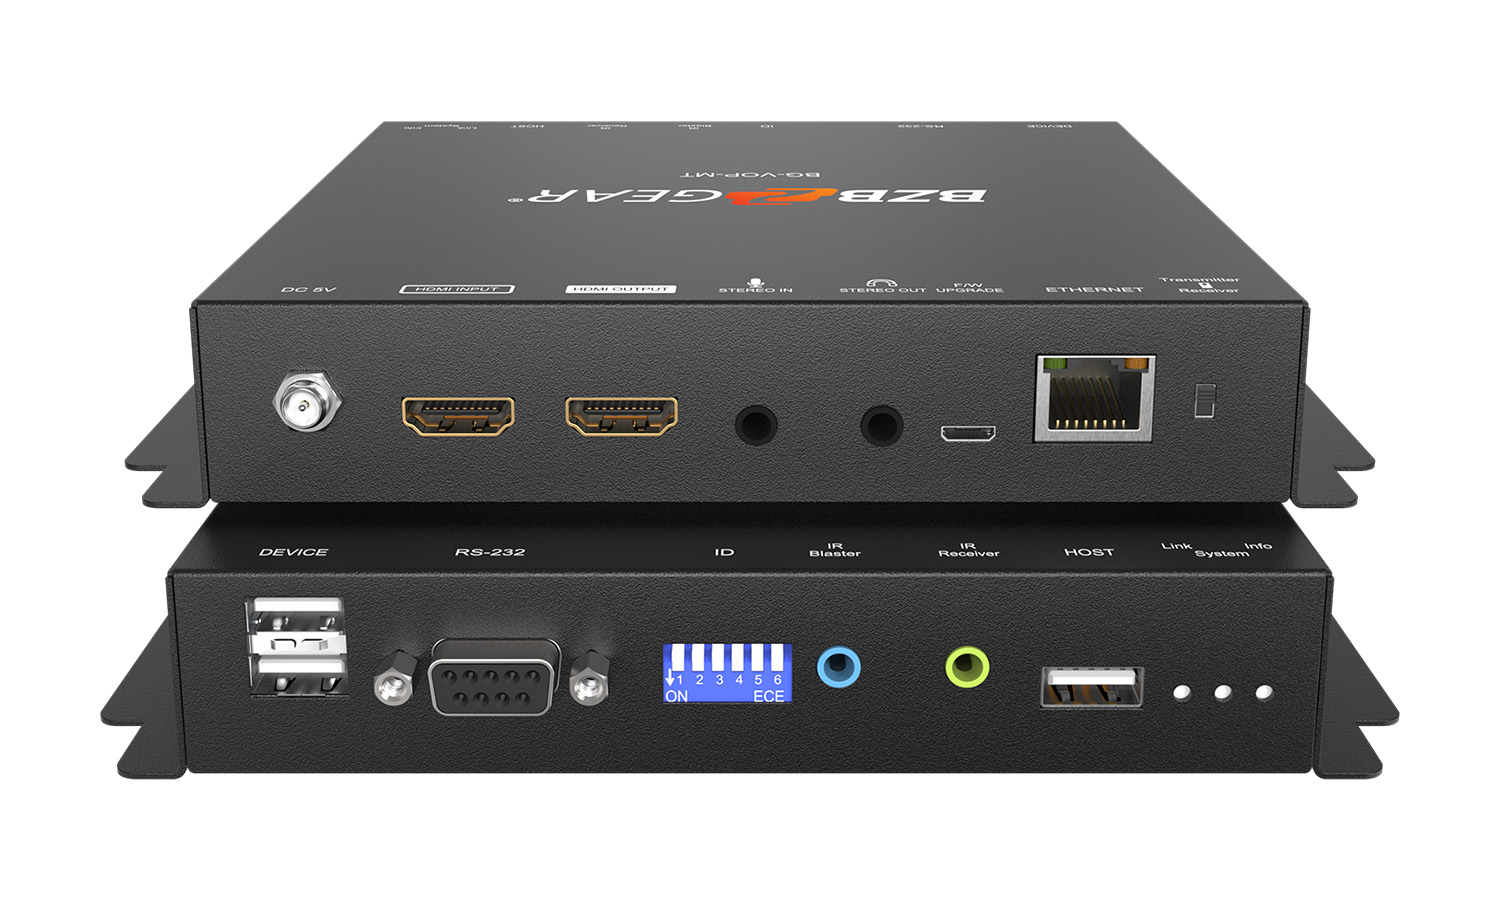 BZBGEAR BG-VOP-MT 4K UHD HDMI 2.0 over IP Multicast Transceiver with Video Wall and PoE Support